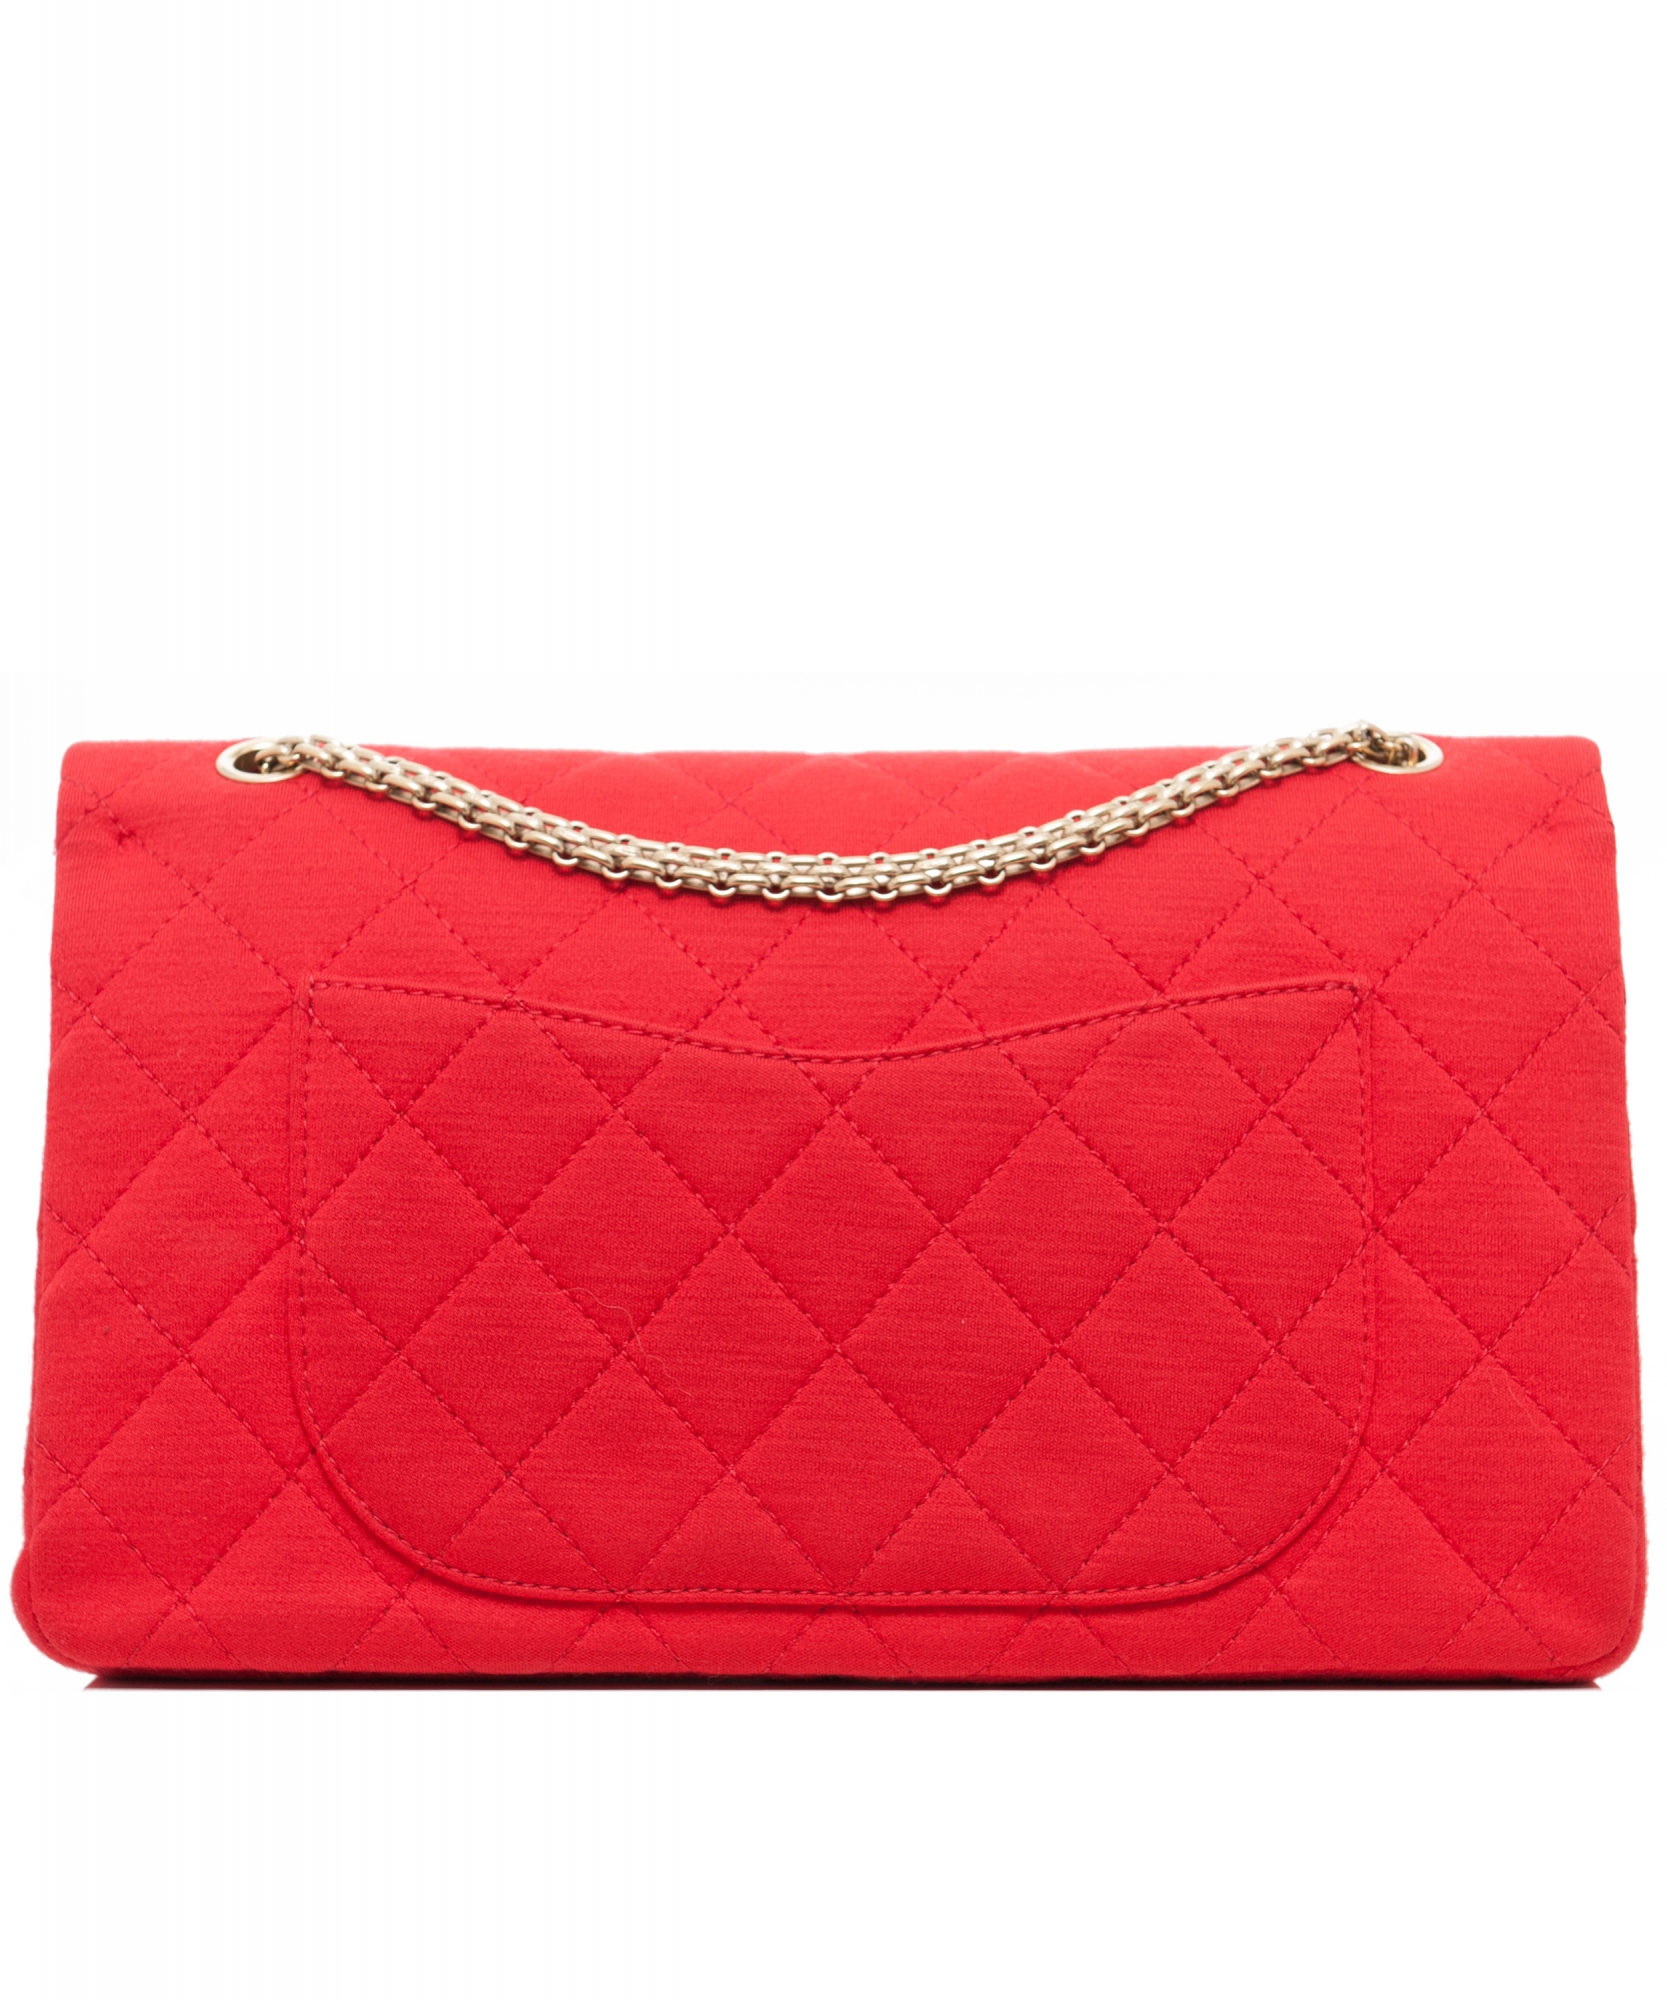 Chanel Red 2.55 Reissue Quilted Classic Jersey 227 Jumbo Flap Bag | La ...